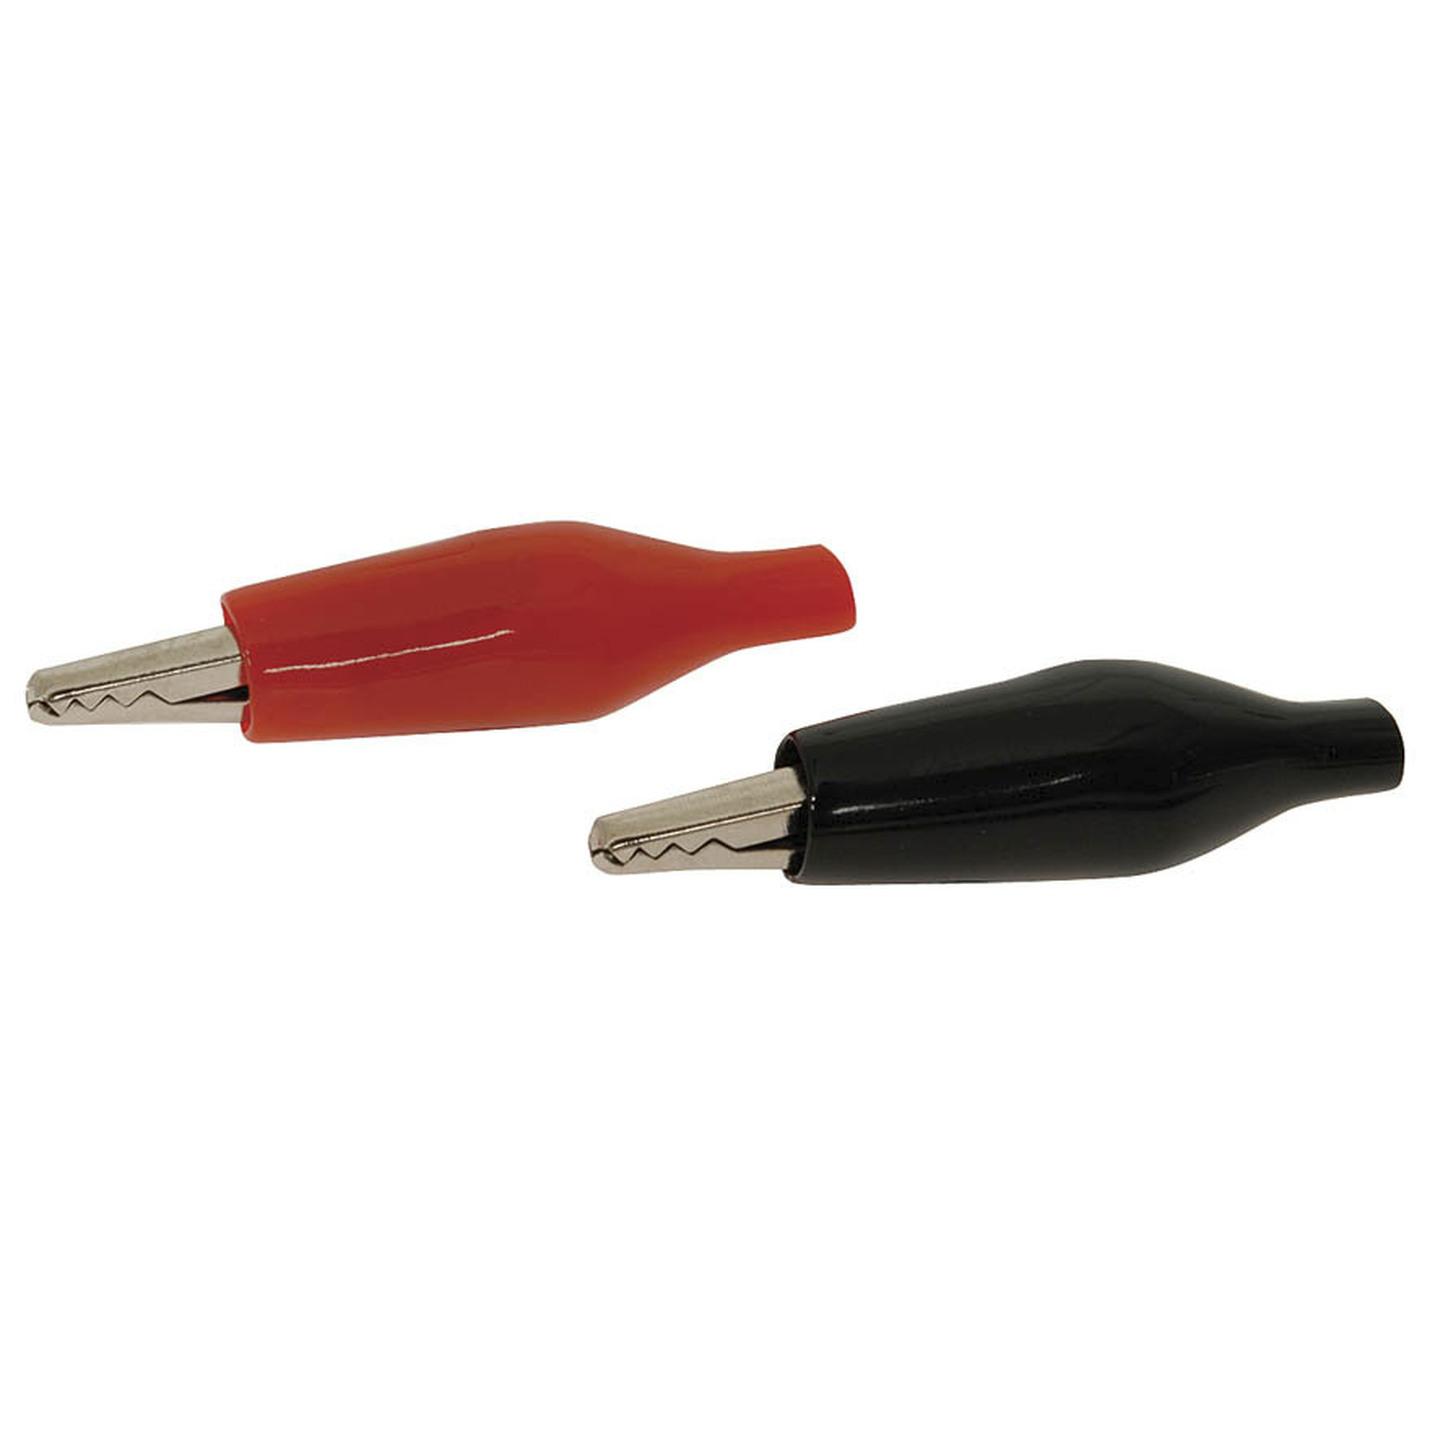 Alligator Clip SMALL - 26MM - Pack of 2